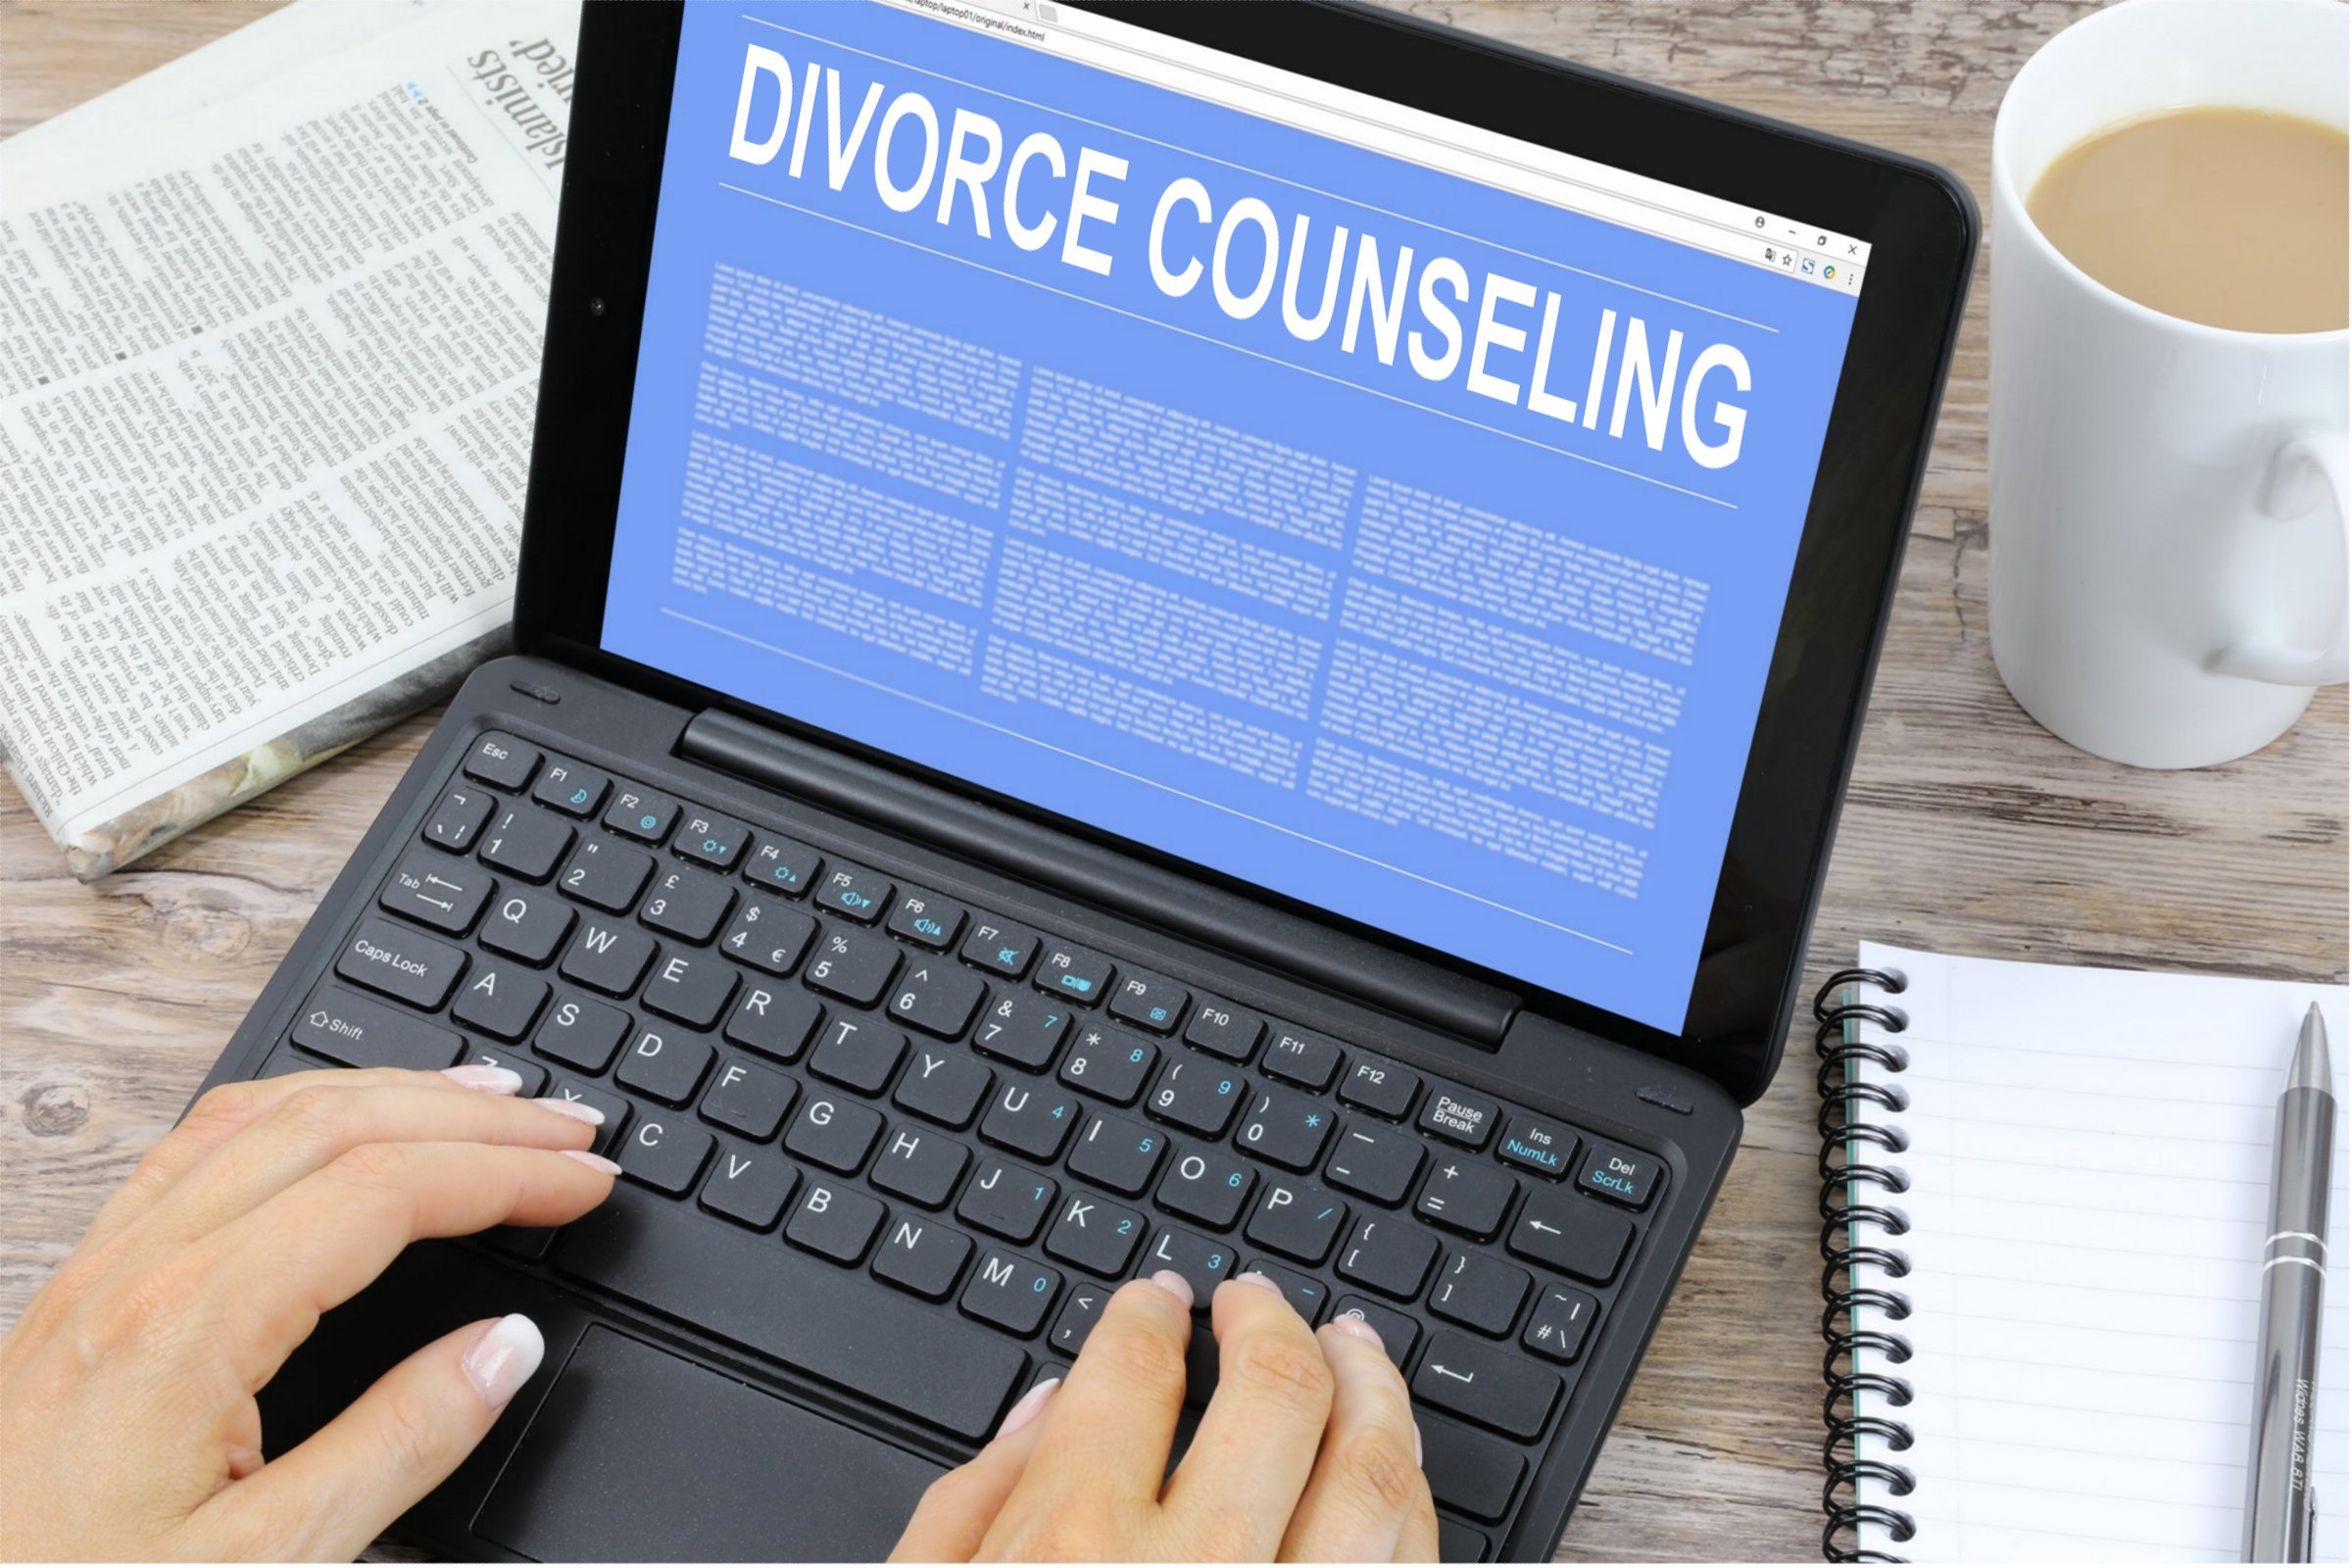 Divorce Counseling